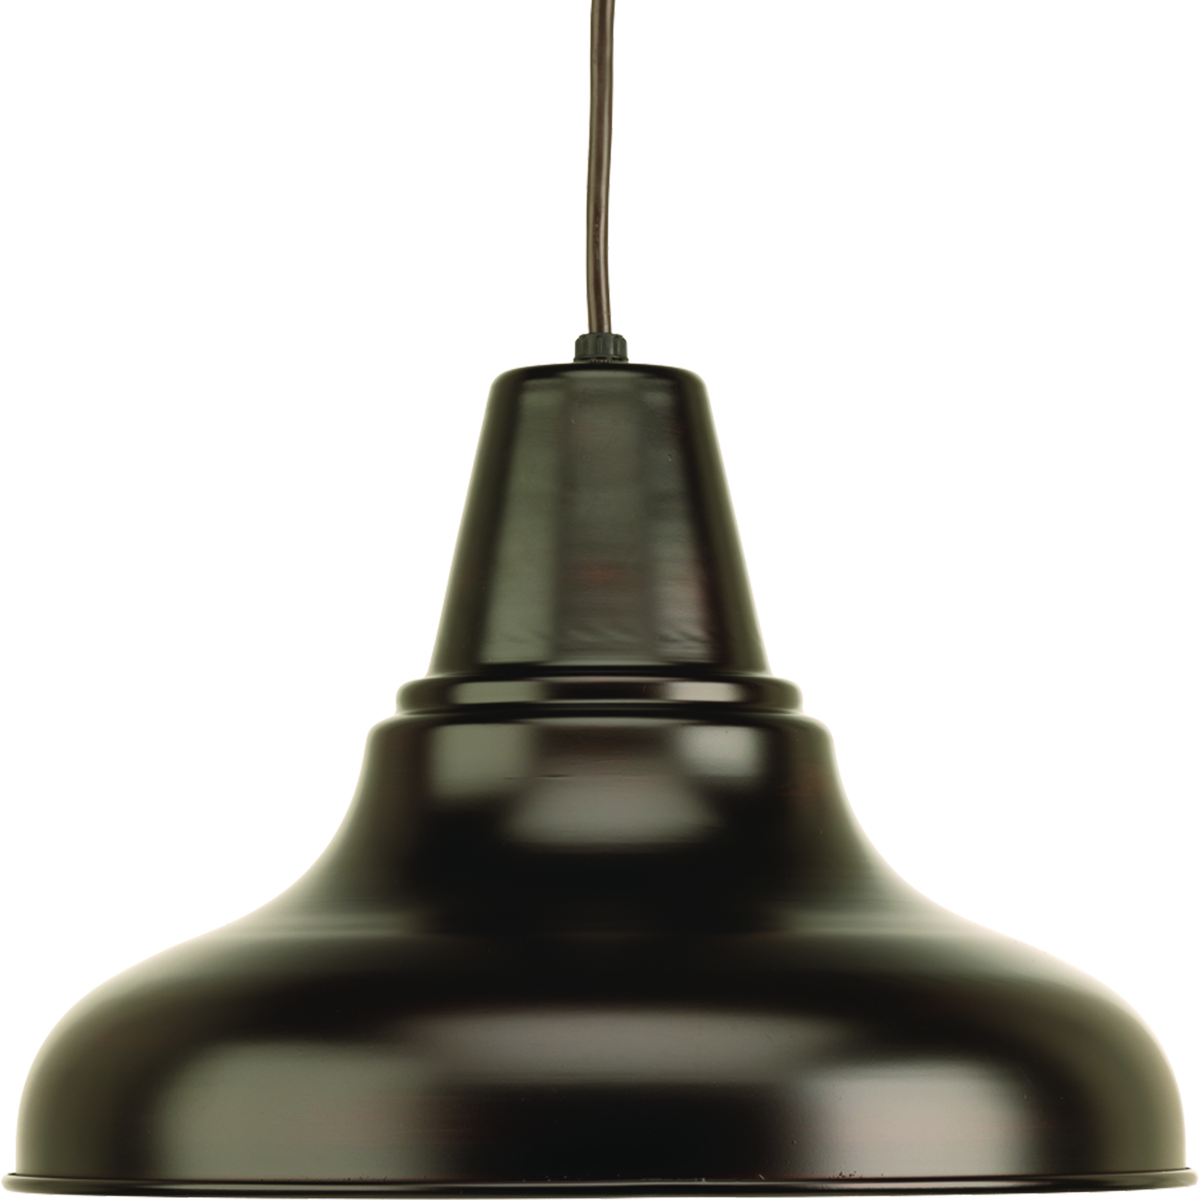 The one-light large cord hung pendant/outdoor hanging lantern from the District Collection features metal shade that offers an industrial-inspired design. The versatile vintage form can be used in indoor and outdoor applications. Antique Bronze finish.